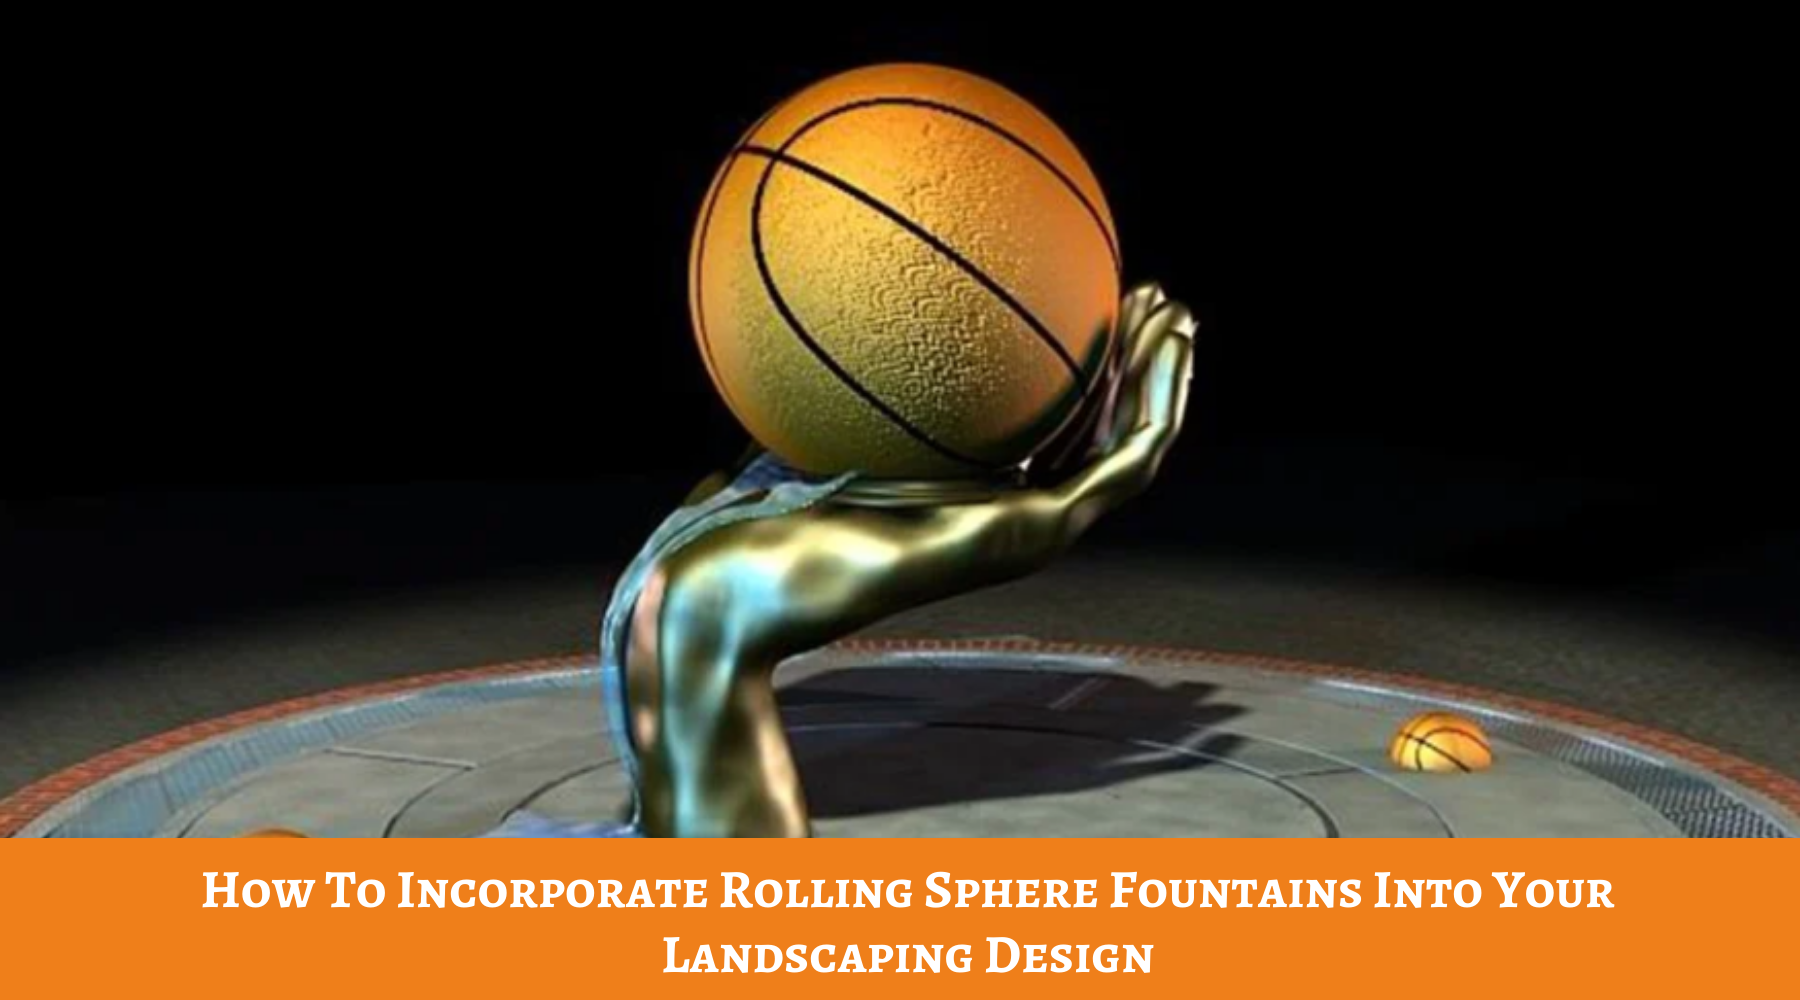 How To Incorporate Rolling Sphere Fountains Into Your Landscaping Design